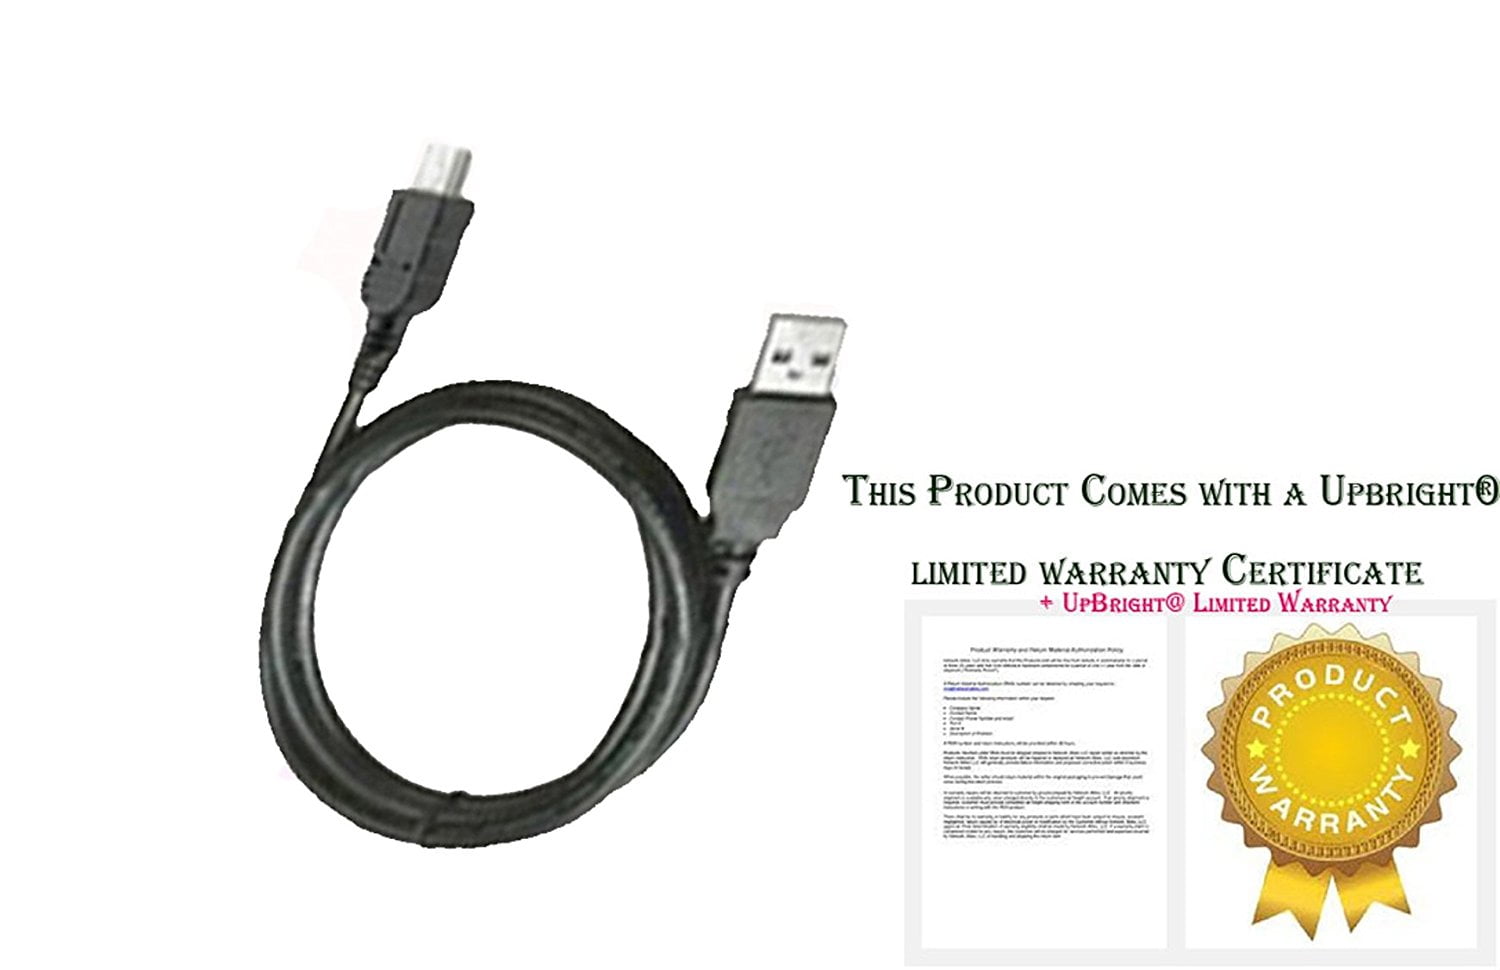 HP PhotoSmart M23 CAMERA REPLACEMENT USB DATA SYNC CABLE/LEAD 